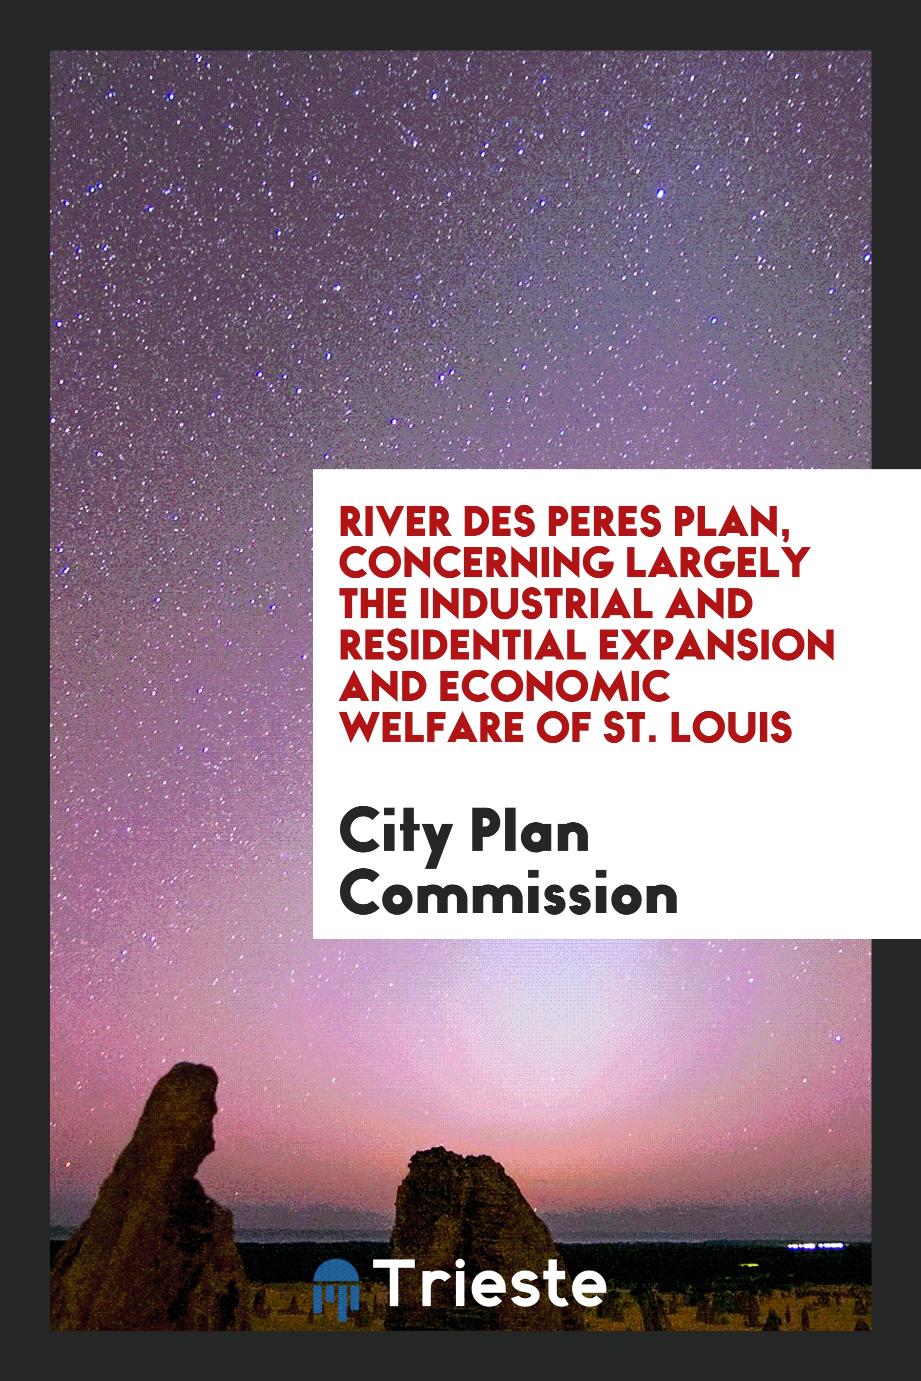 River des Peres plan, concerning largely the industrial and residential expansion and economic welfare of St. Louis